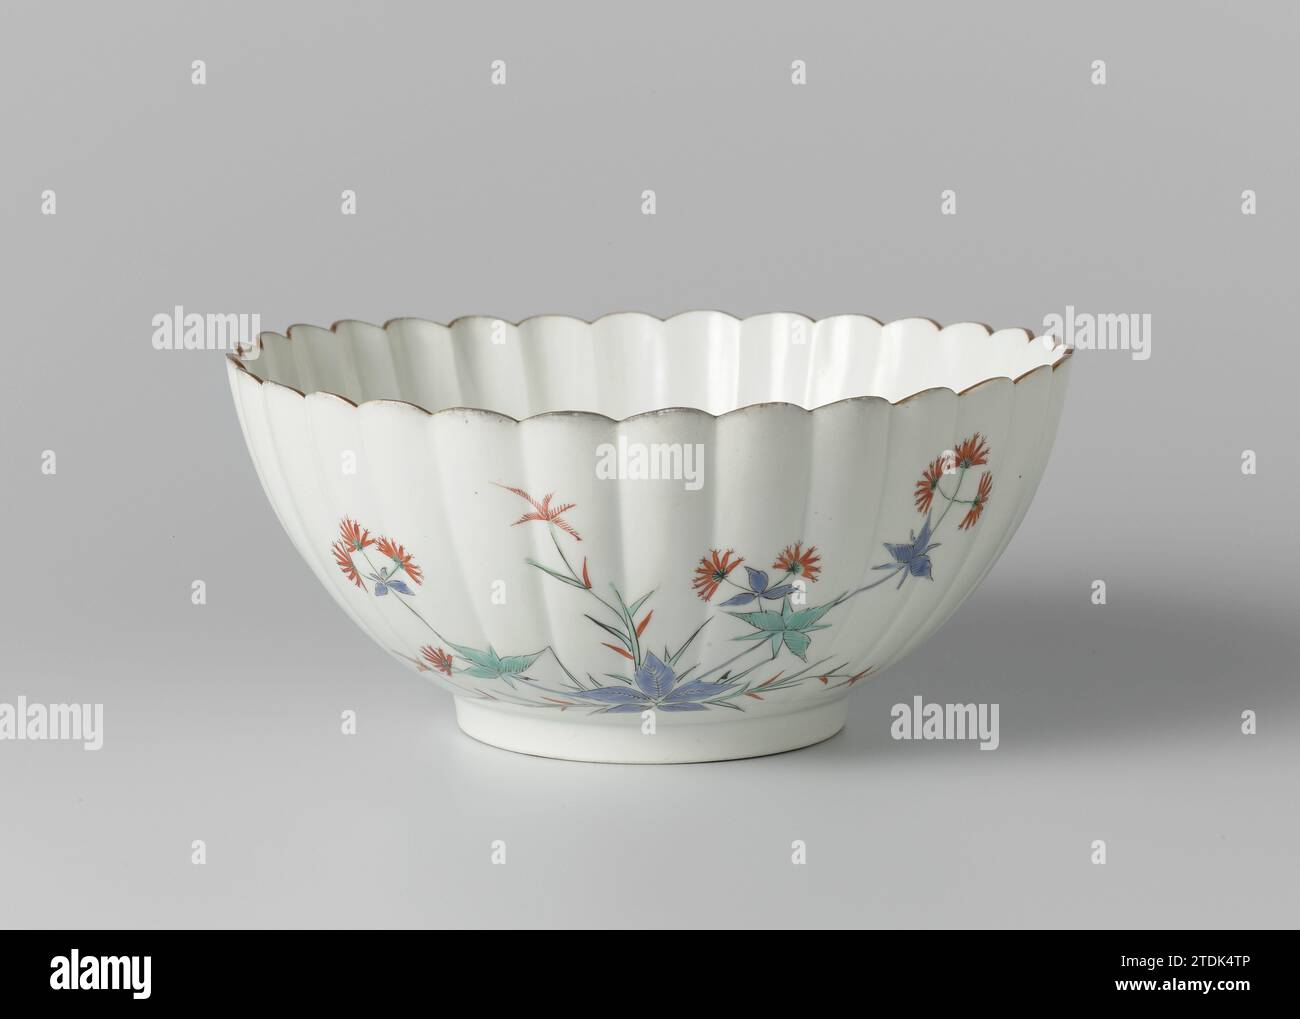 Lobed bowl with patrinia, mistflower and butterflies, anonymous, c. 1670 - c. 1690 Come from porcelain with ribbed wall of 30 ribs, painted on the glaze in blue, red, green, yellow and black with Patinia (Ominaeshi, Patinia Scabiosaefolia on the outside wall on the outside wall); On the other hand, liver herb (Fujibakama, Eupatorium Fortunei) and two butterflies between the plants. Two Hoo birds with clouds in circular shape on the bottom. Brown edge. Old label on the bottom with 'Collection Westendorp/ 128'. Kakiemon. Japan porcelain. glaze. painting / vitrification Come from porcelain with r Stock Photo